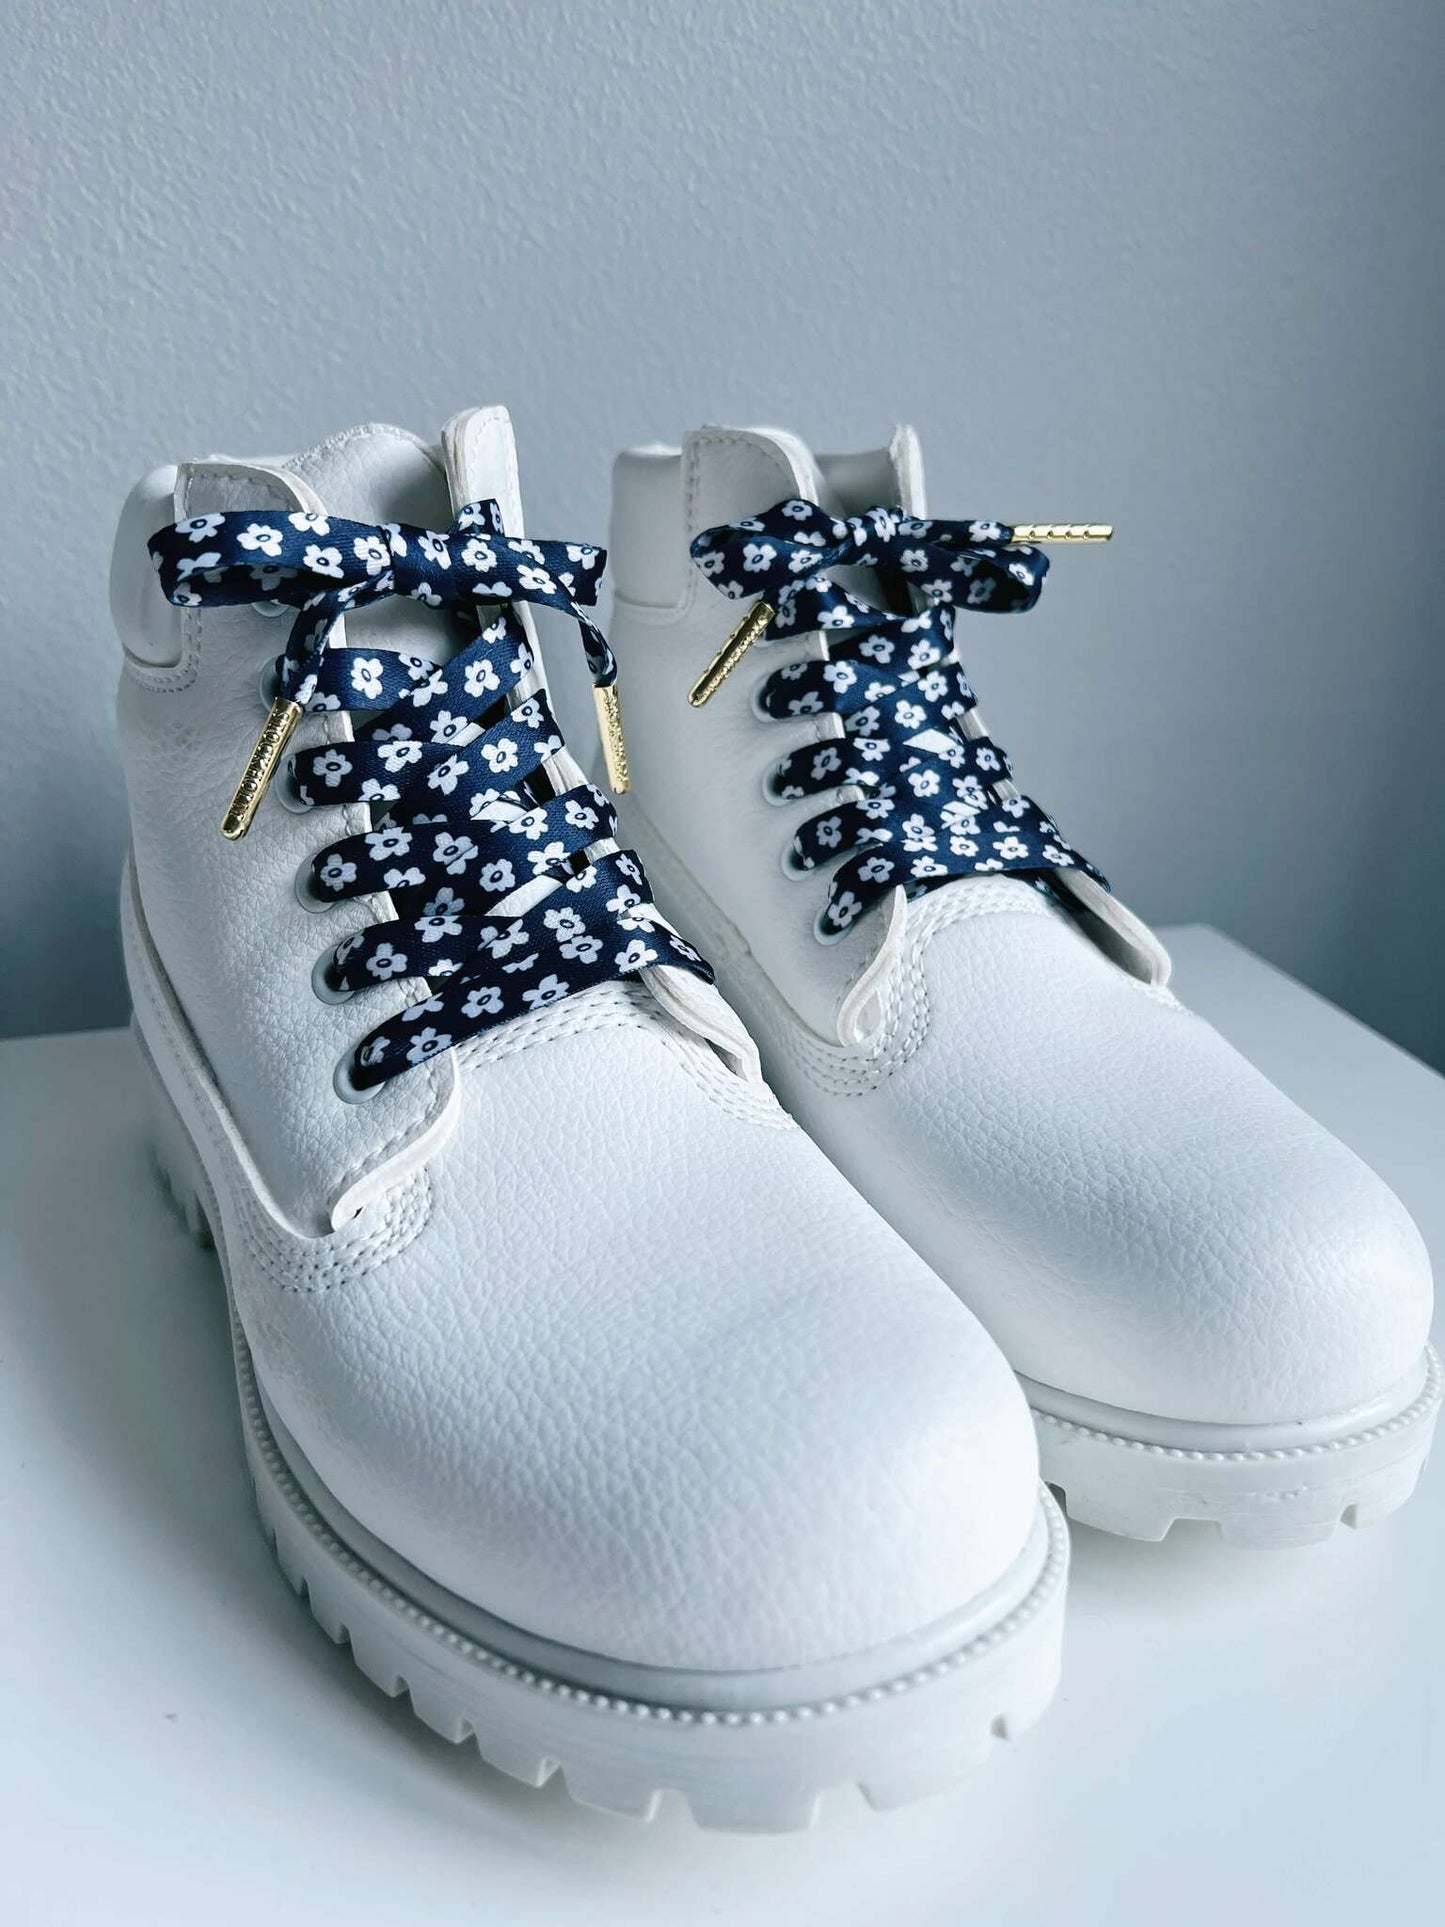 Patterned shoelaces blue flowers - The Shoelace Brand